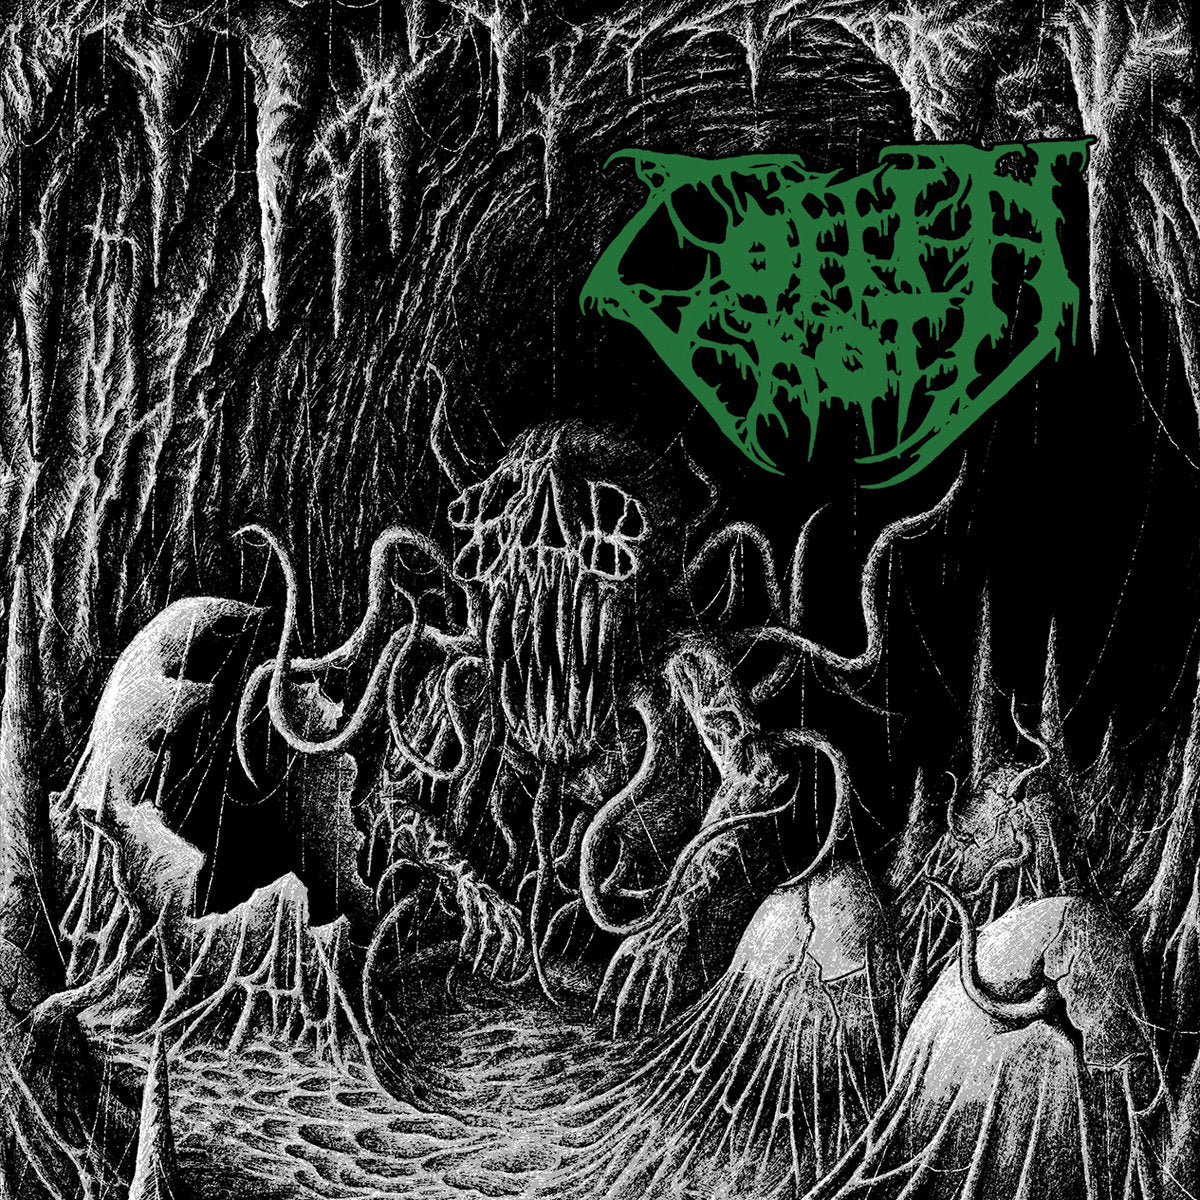 Coffin Rot "Dawn Of Decay (The Demos)" CD